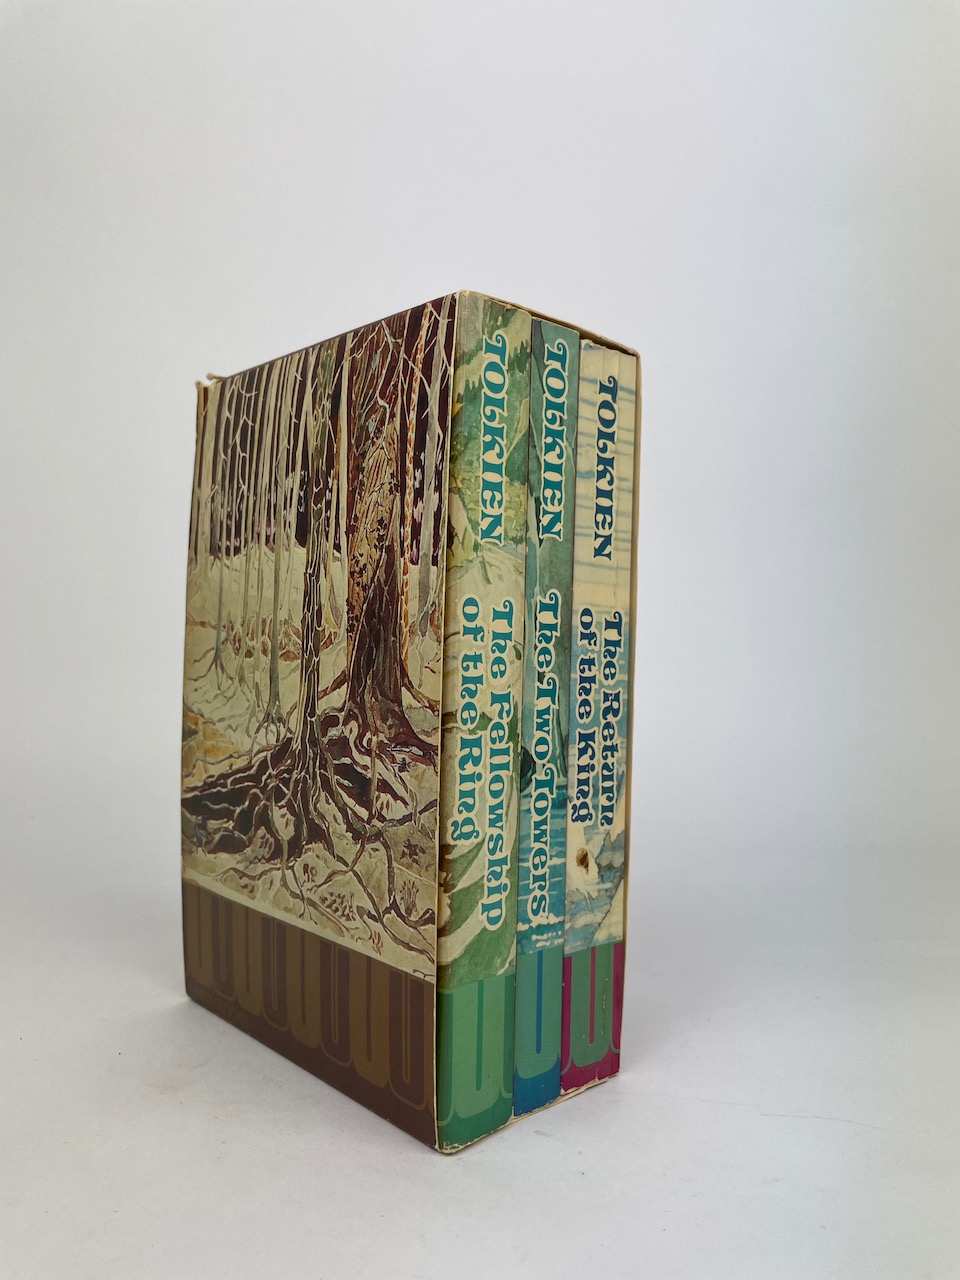 The Lord of the Rings with Tolkien art in sleeve from 1974, by Unwin Books